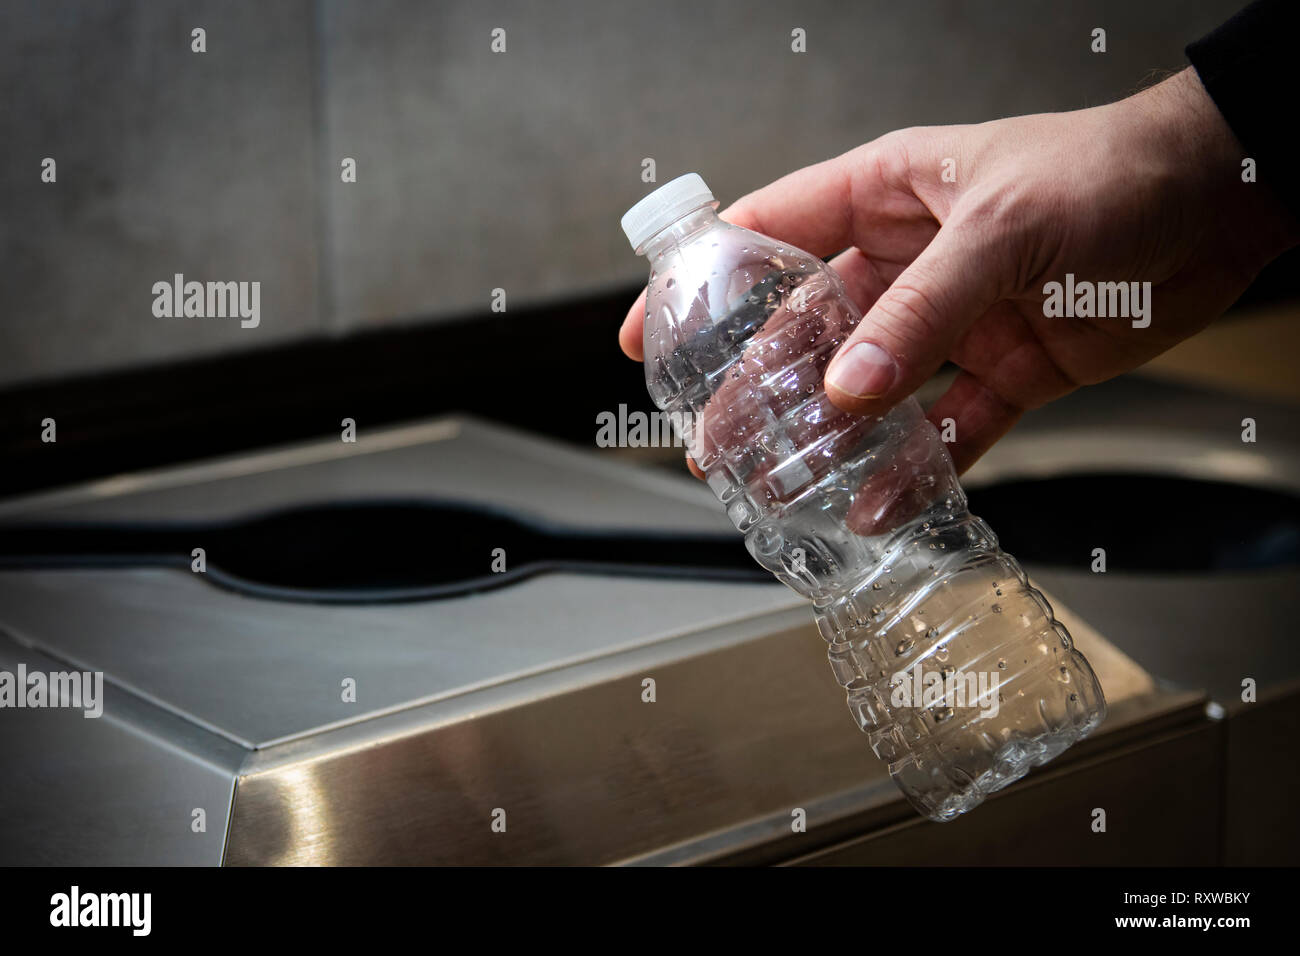 Hand throwing disposable plastic water bottle into trash or recycling bin. Stock Photo